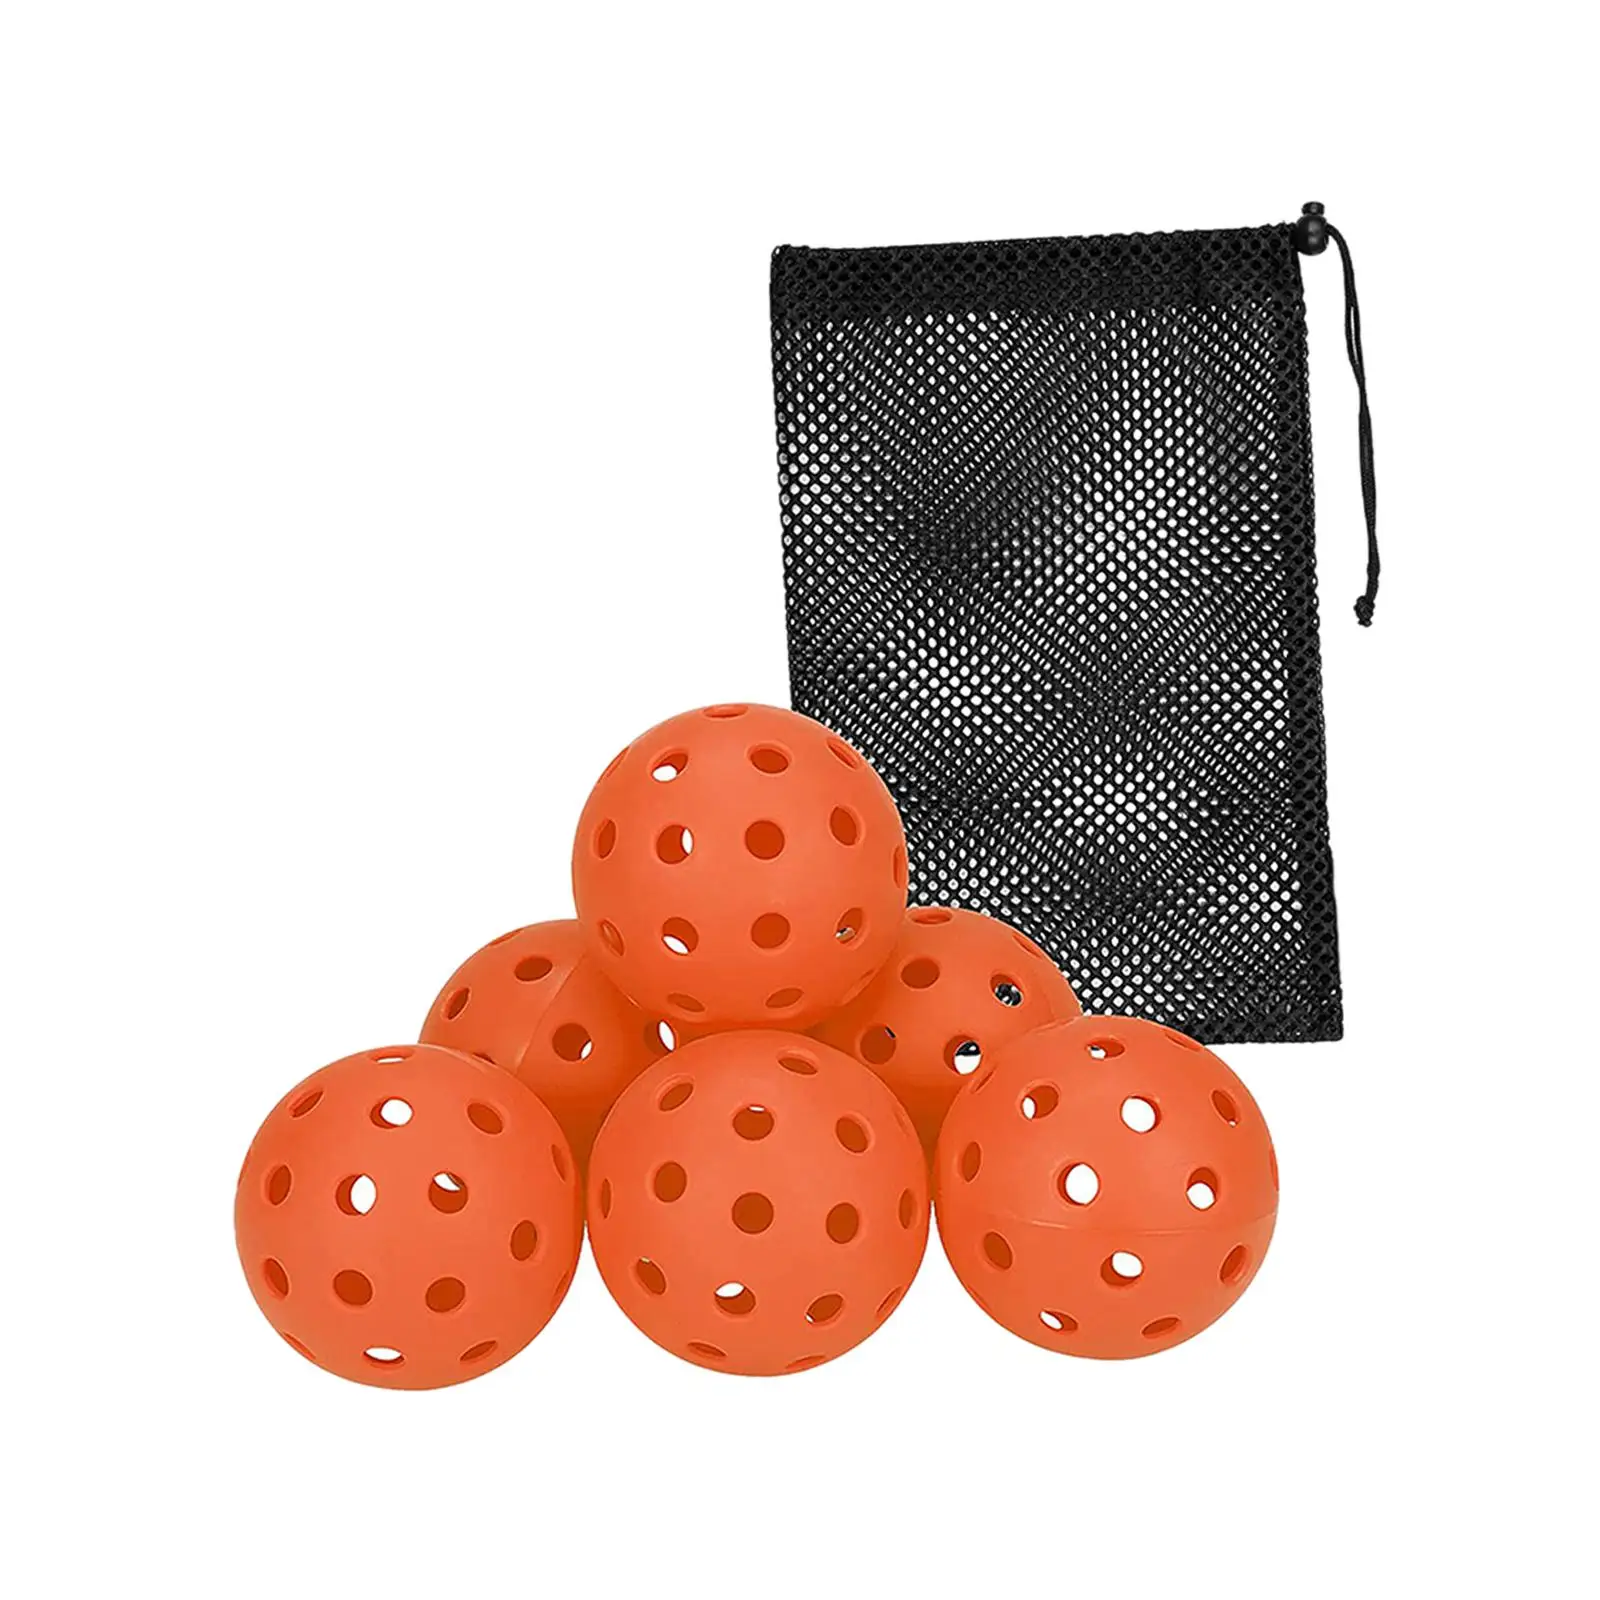 6x 40 Holes Pickleball Balls with Mesh Bag Pickleball Accessories for Adult